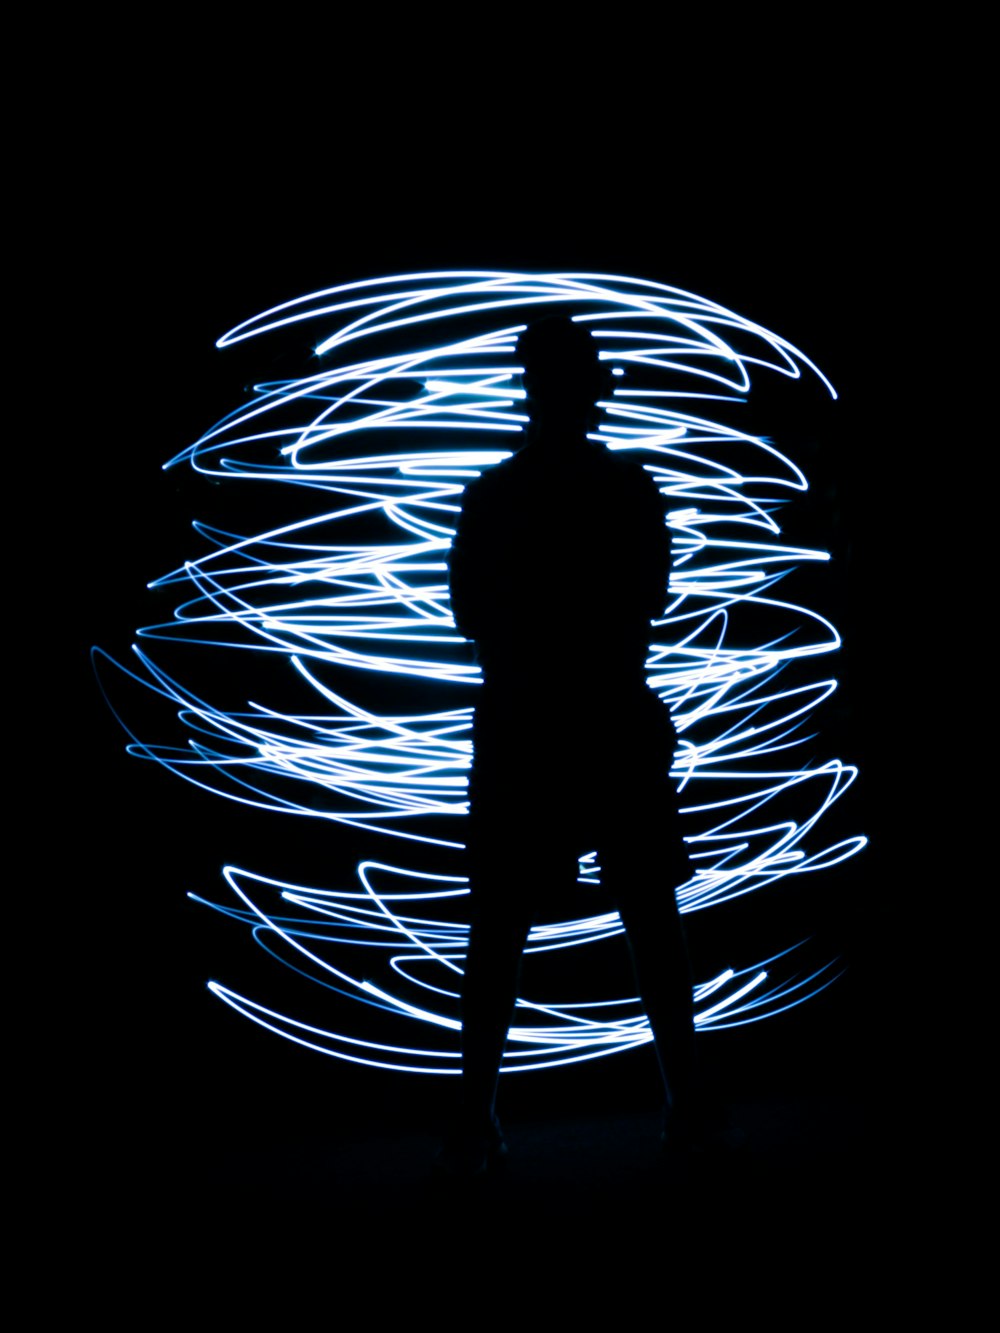 black silhouette of a man with overexposed lights